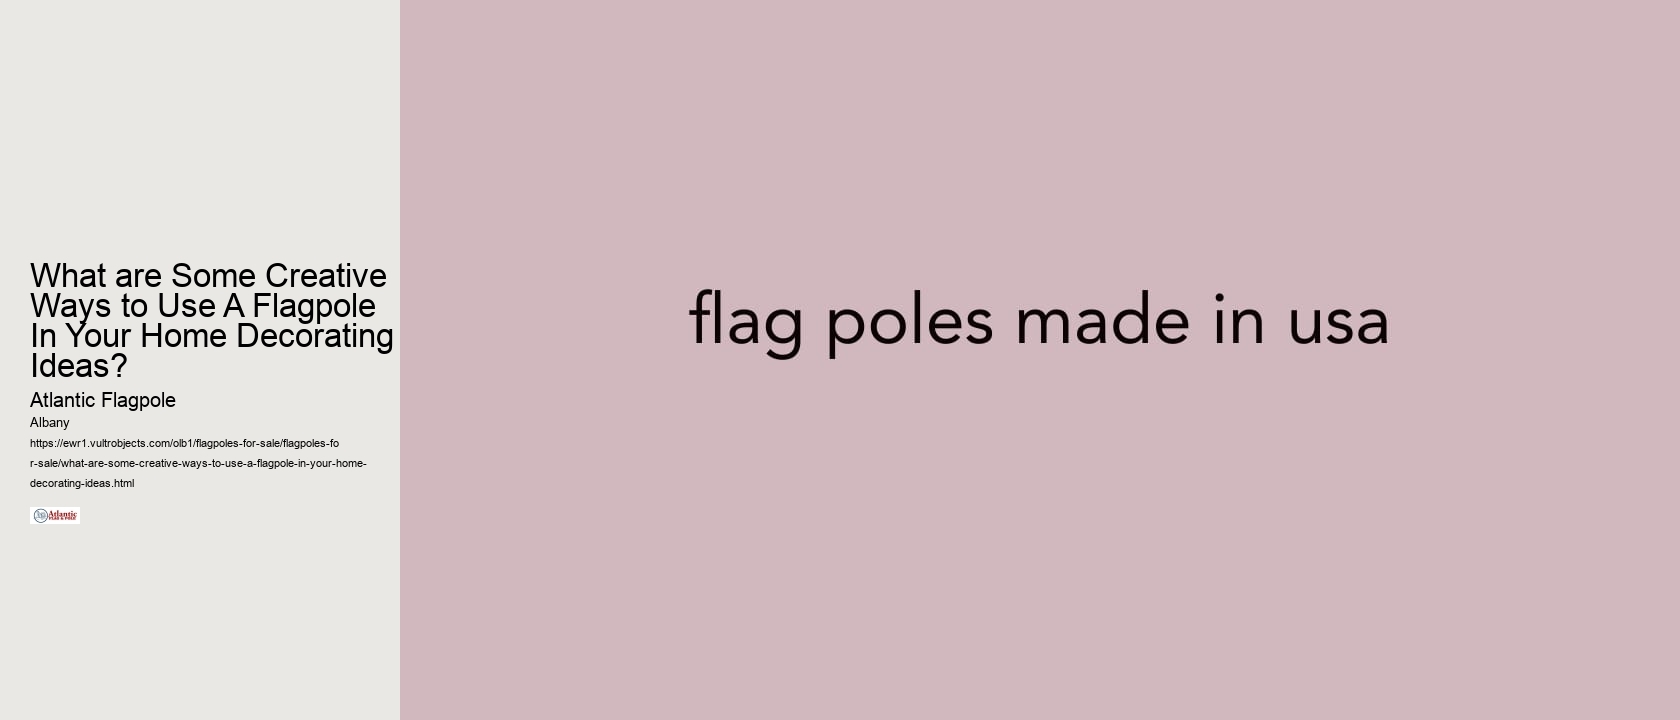 What are Some Creative Ways to Use A Flagpole In Your Home Decorating Ideas?